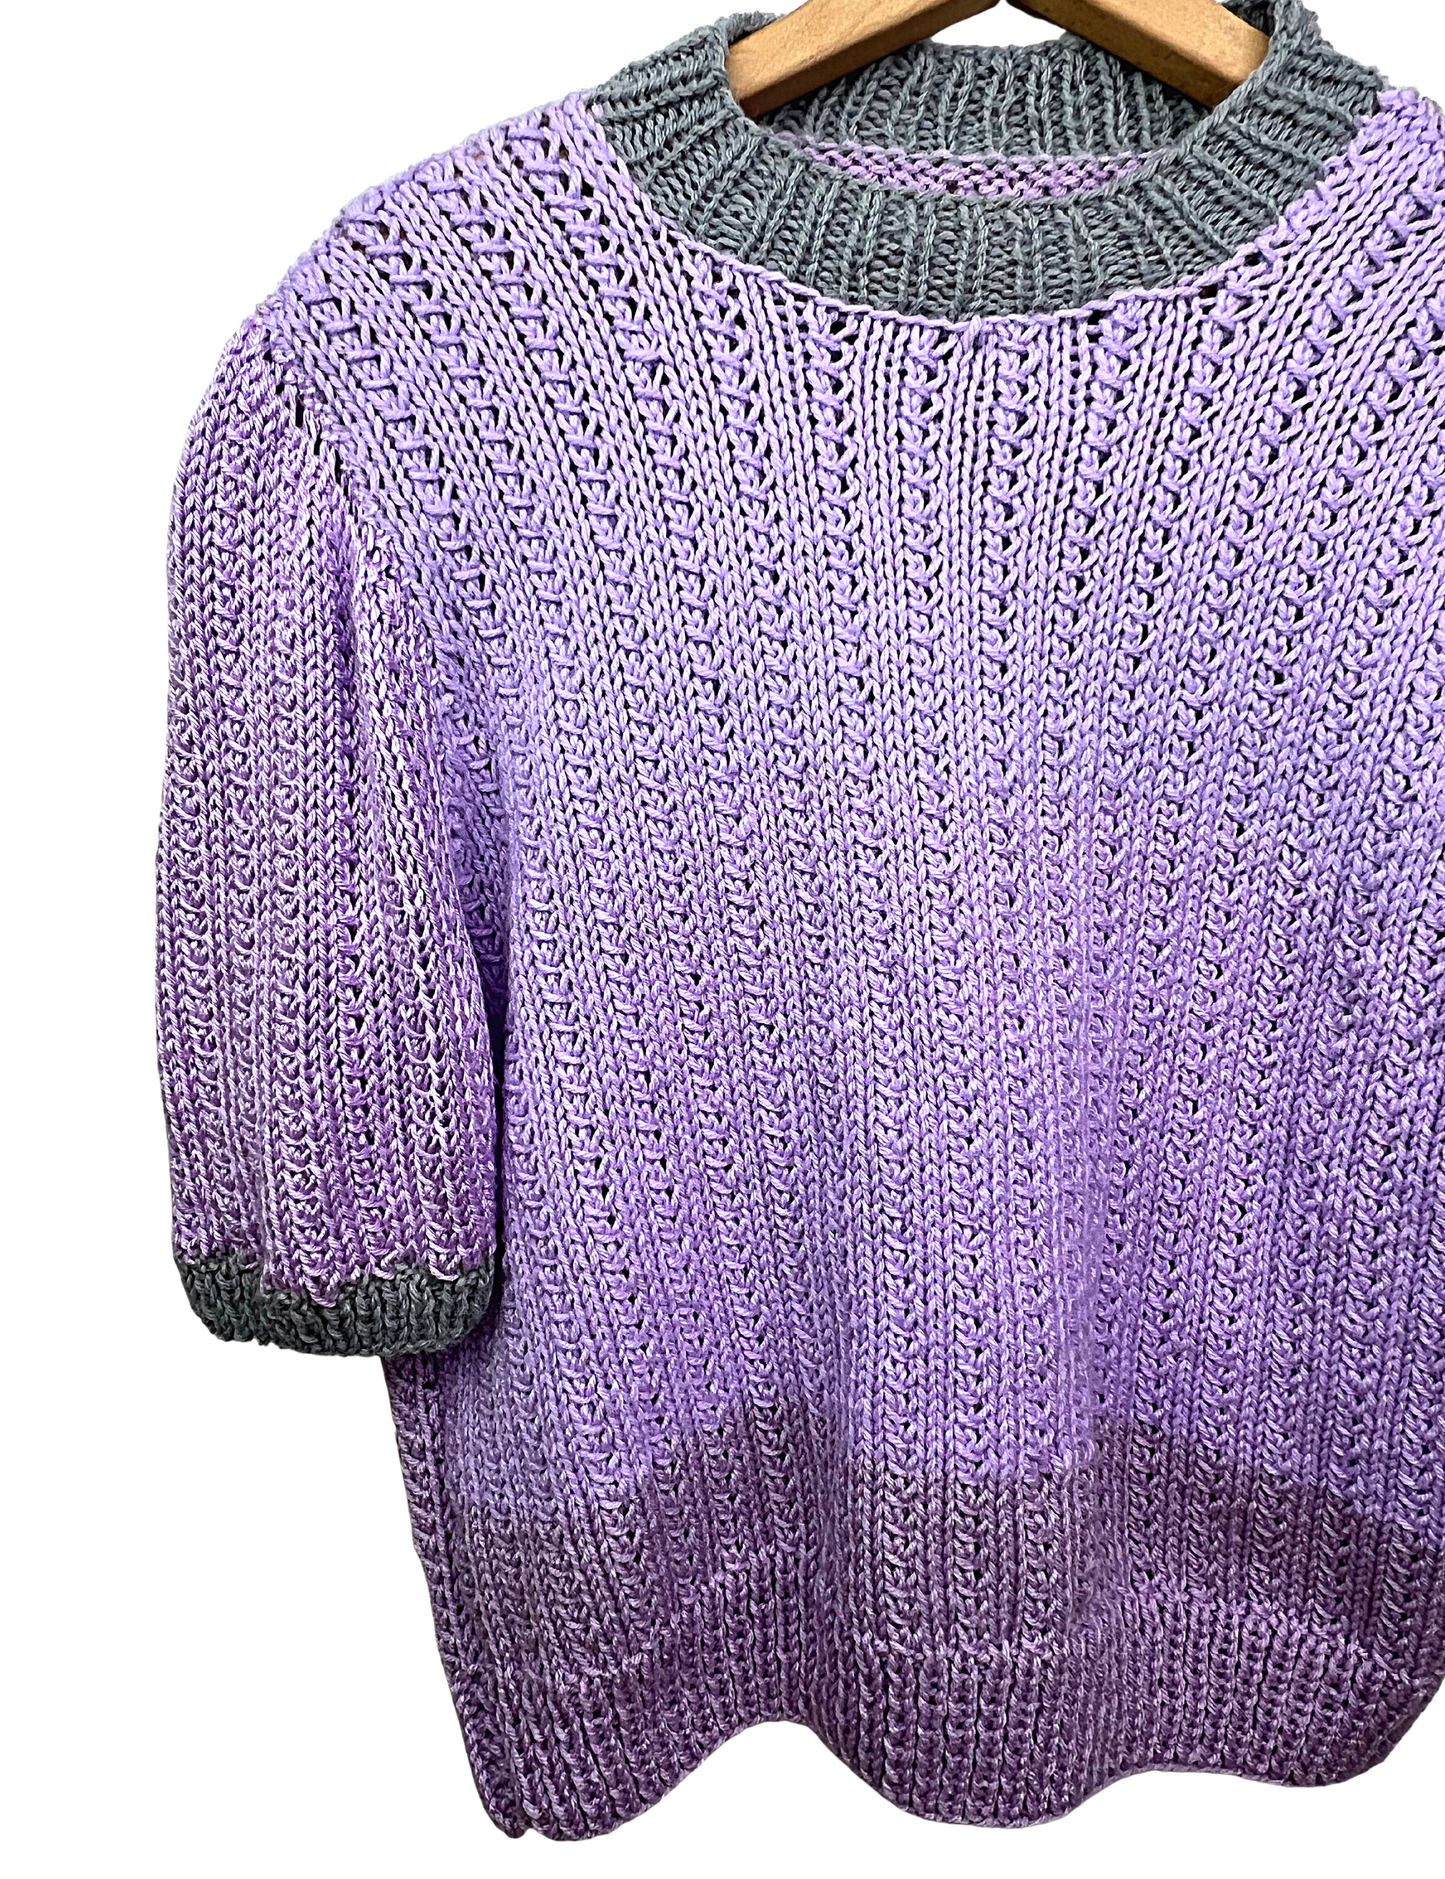 70’s 80’s Lilac & Lavender Crocheted Chunky Mockneck Crop Sweater